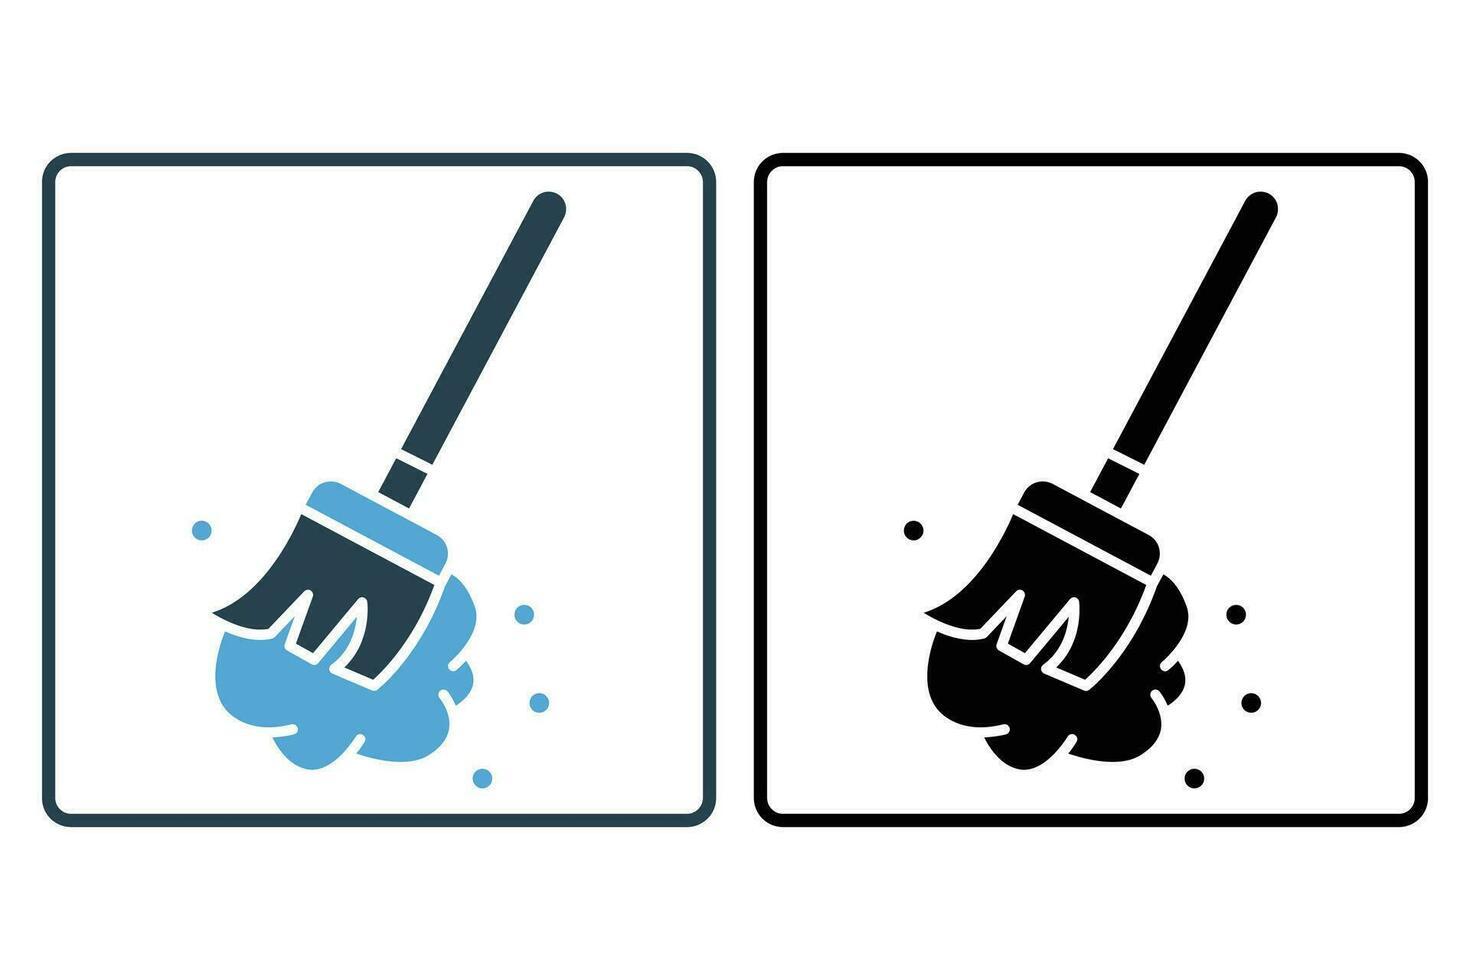 Broom cleaning icon. icon related to cleaner, household appliances. Solid icon style design. Simple vector design editable